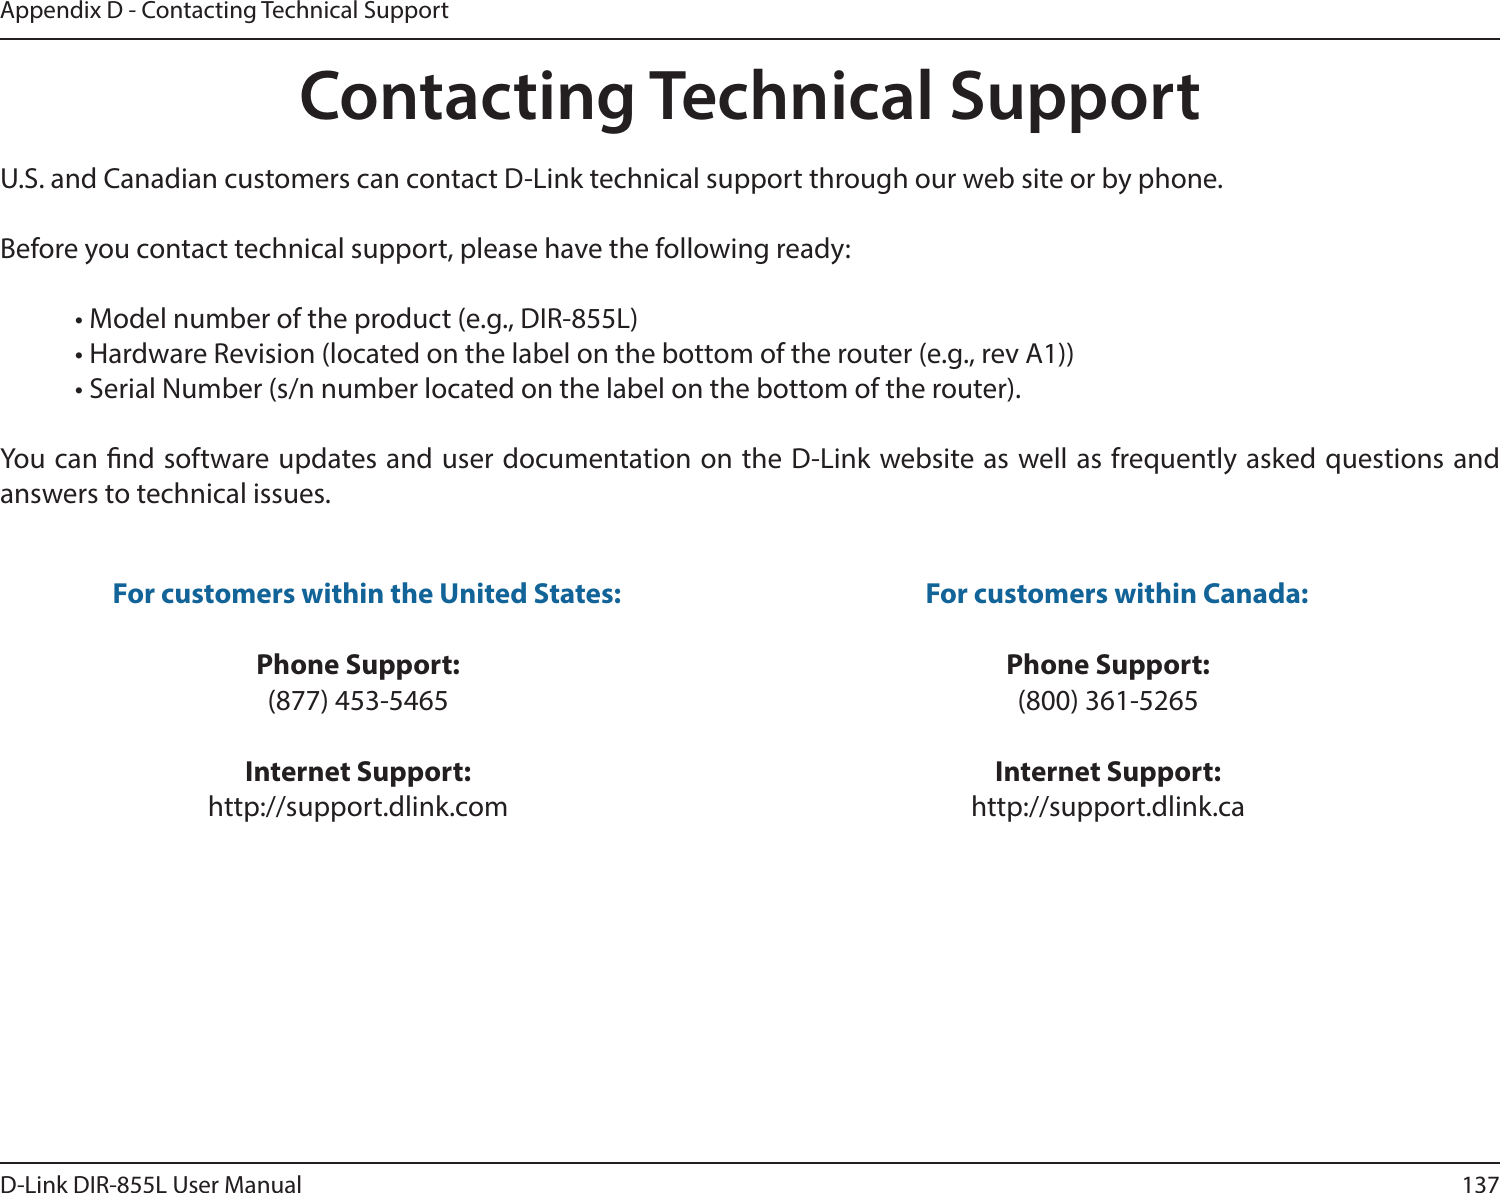 137D-Link DIR-855L User ManualAppendix D - Contacting Technical SupportContacting Technical SupportU.S. and Canadian customers can contact D-Link technical support through our web site or by phone.Before you contact technical support, please have the following ready:  • Model number of the product (e.g., DIR-855L)  • Hardware Revision (located on the label on the bottom of the router (e.g., rev A1))  • Serial Number (s/n number located on the label on the bottom of the router). You can nd software updates and user documentation on the D-Link website as well as frequently asked questions and answers to technical issues.ForcustomerswithintheUnitedStates: Phone Support:(877) 453-5465Internet Support:http://support.dlink.com ForcustomerswithinCanada: Phone Support:(800) 361-5265Internet Support:http://support.dlink.ca 